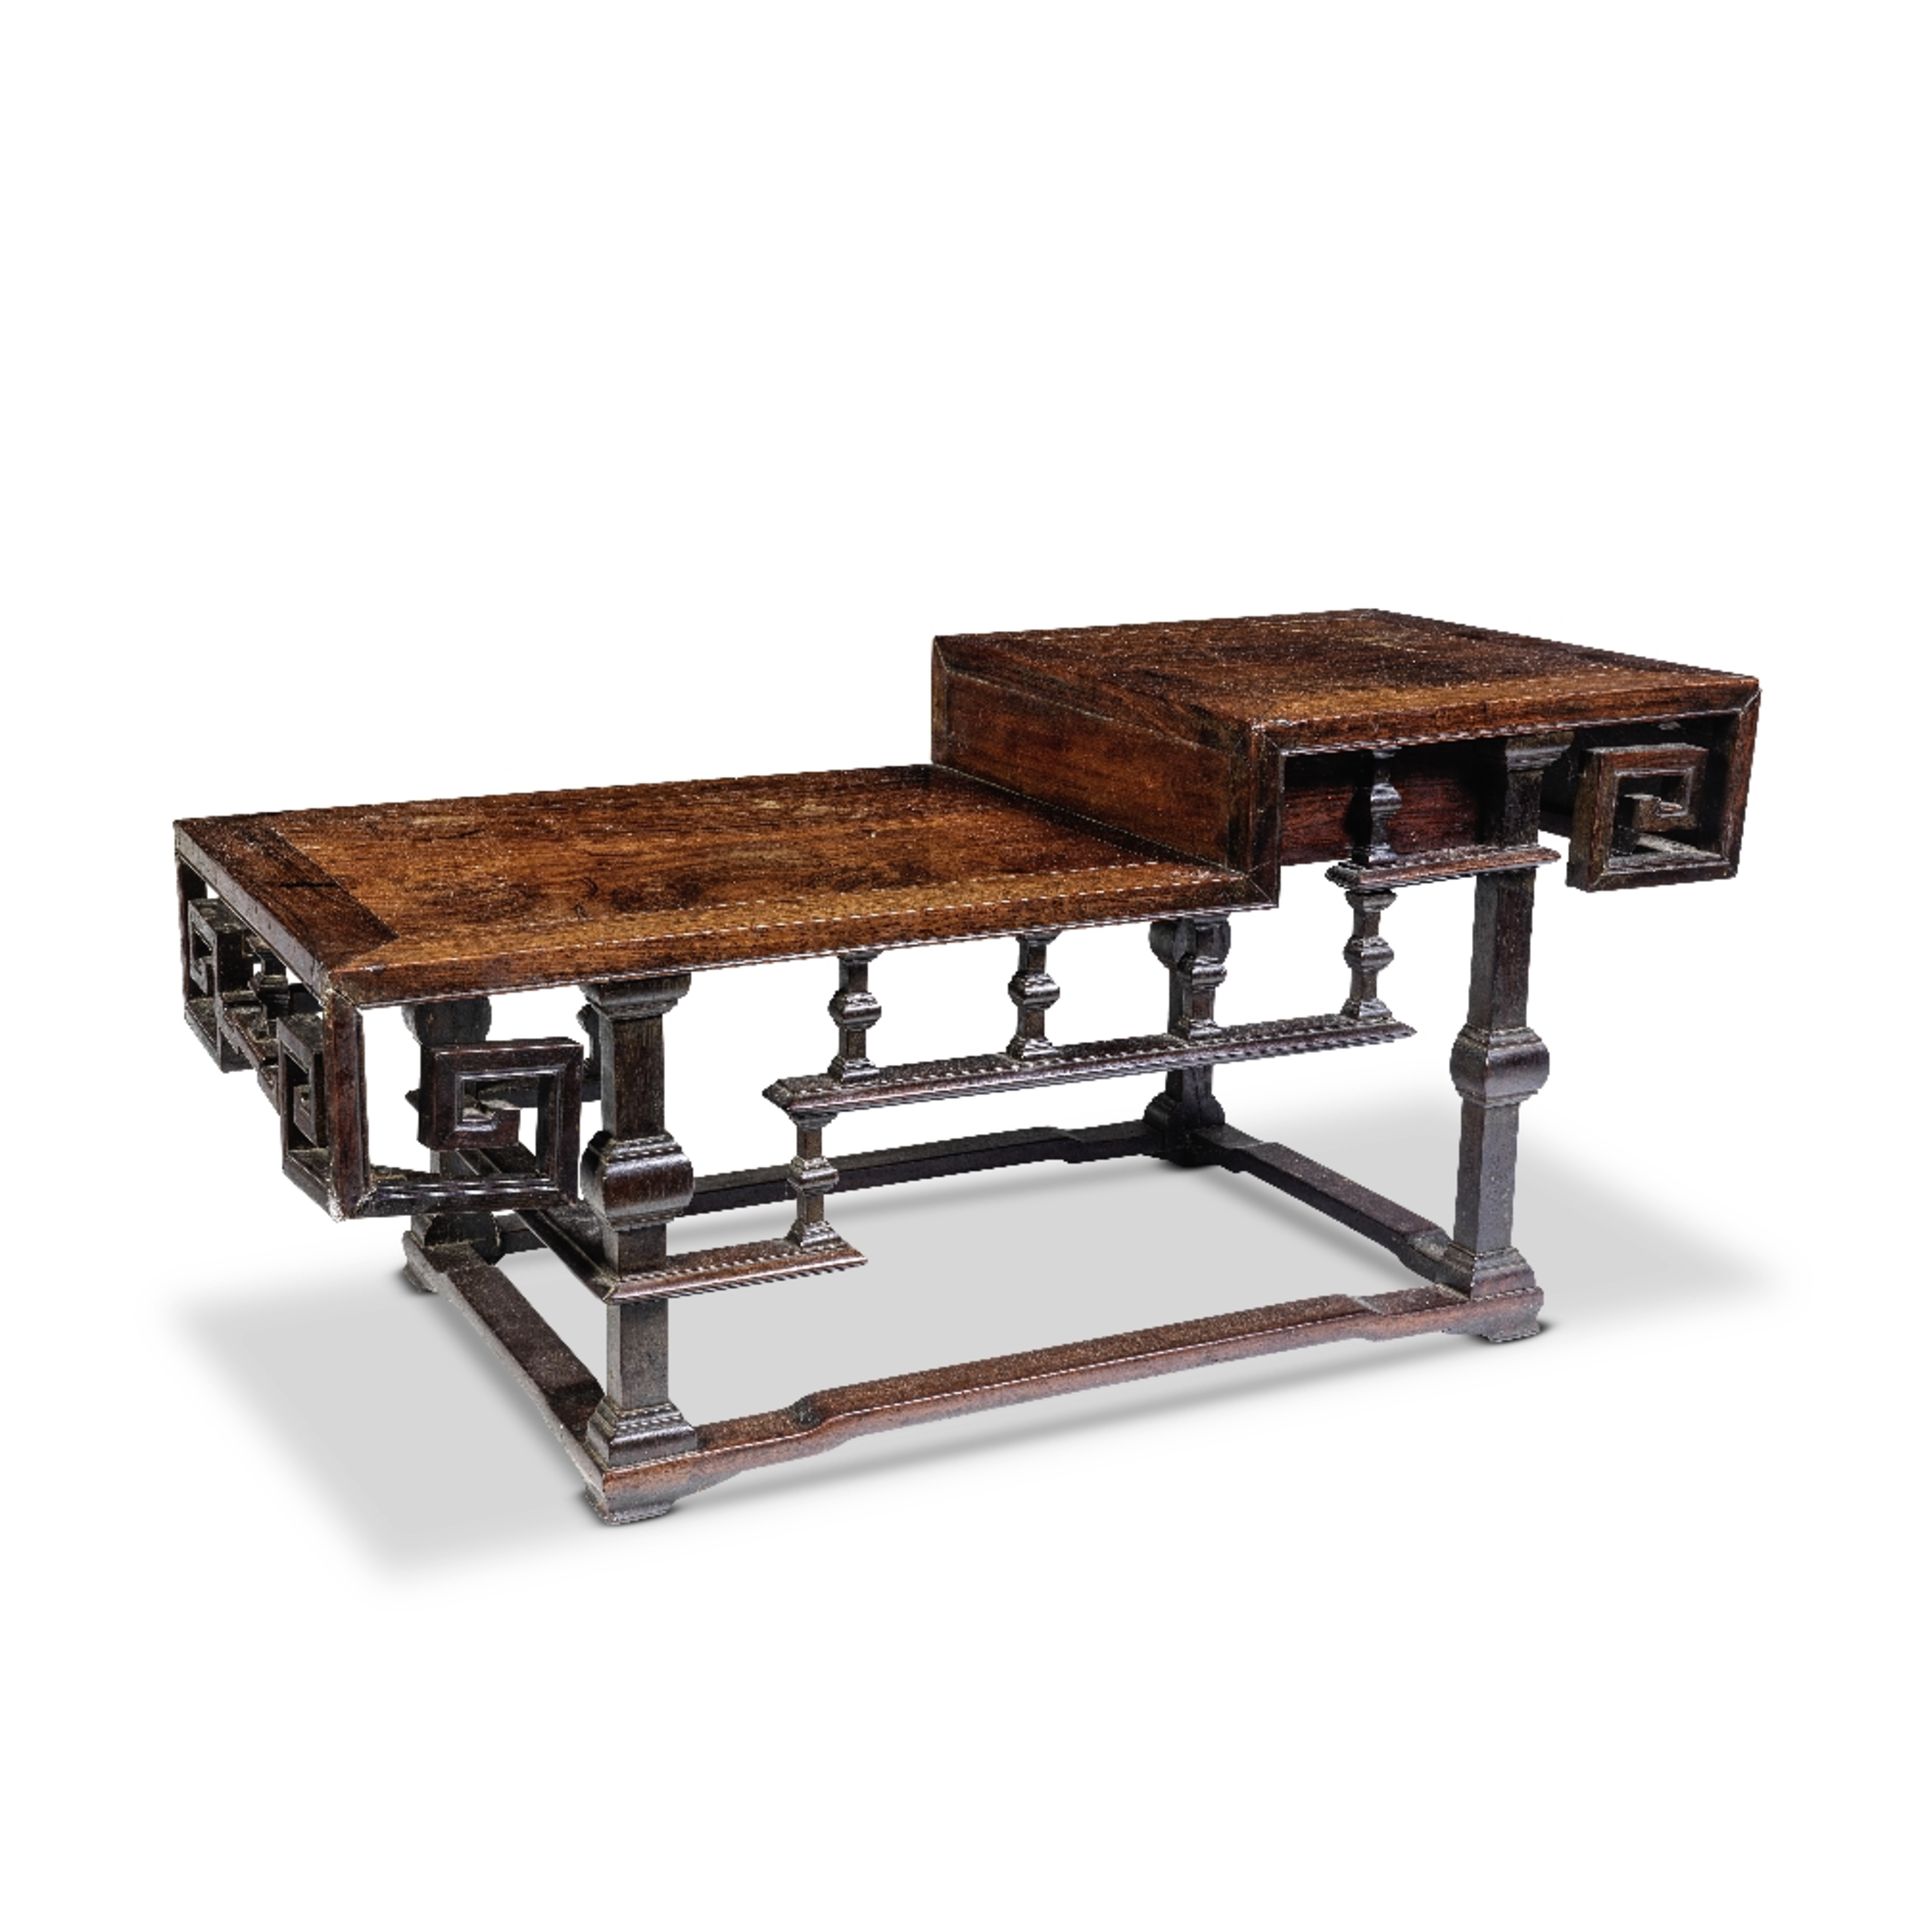 A HUALI WOOD LOW TABLE 19th/20th century